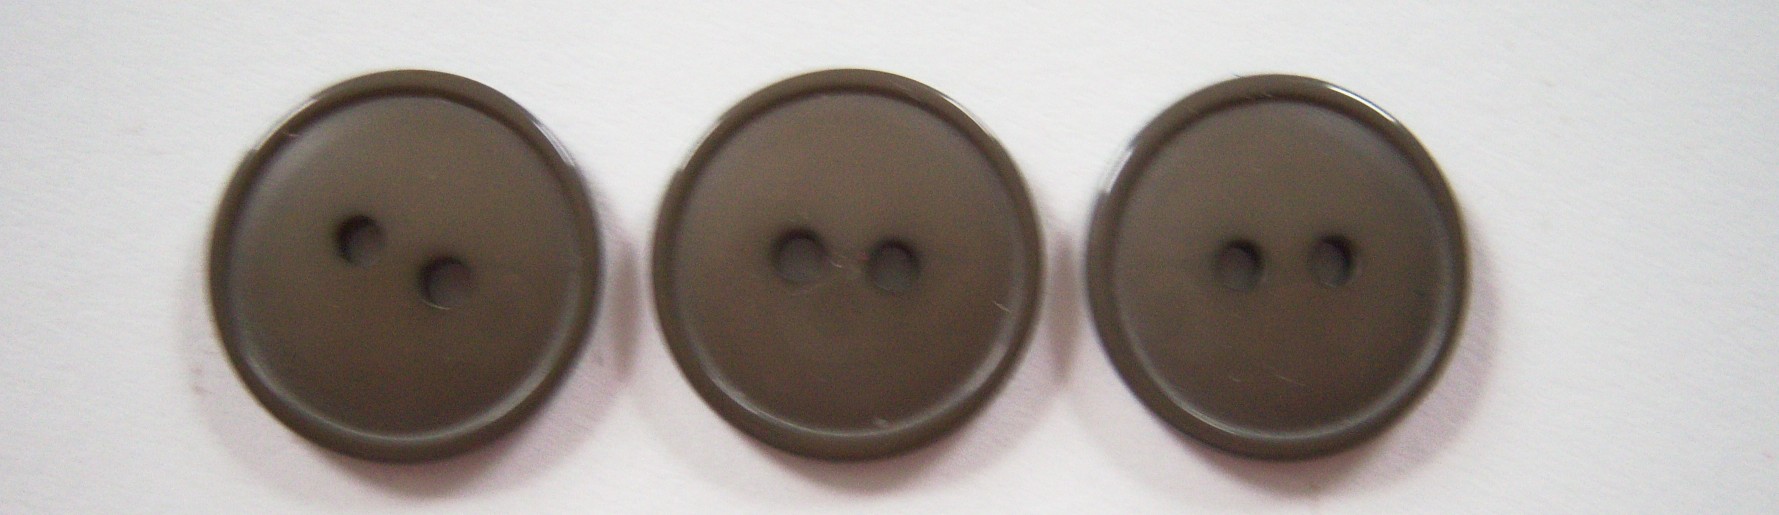 Olive Drab 3/4" Poly 2 Hole Button